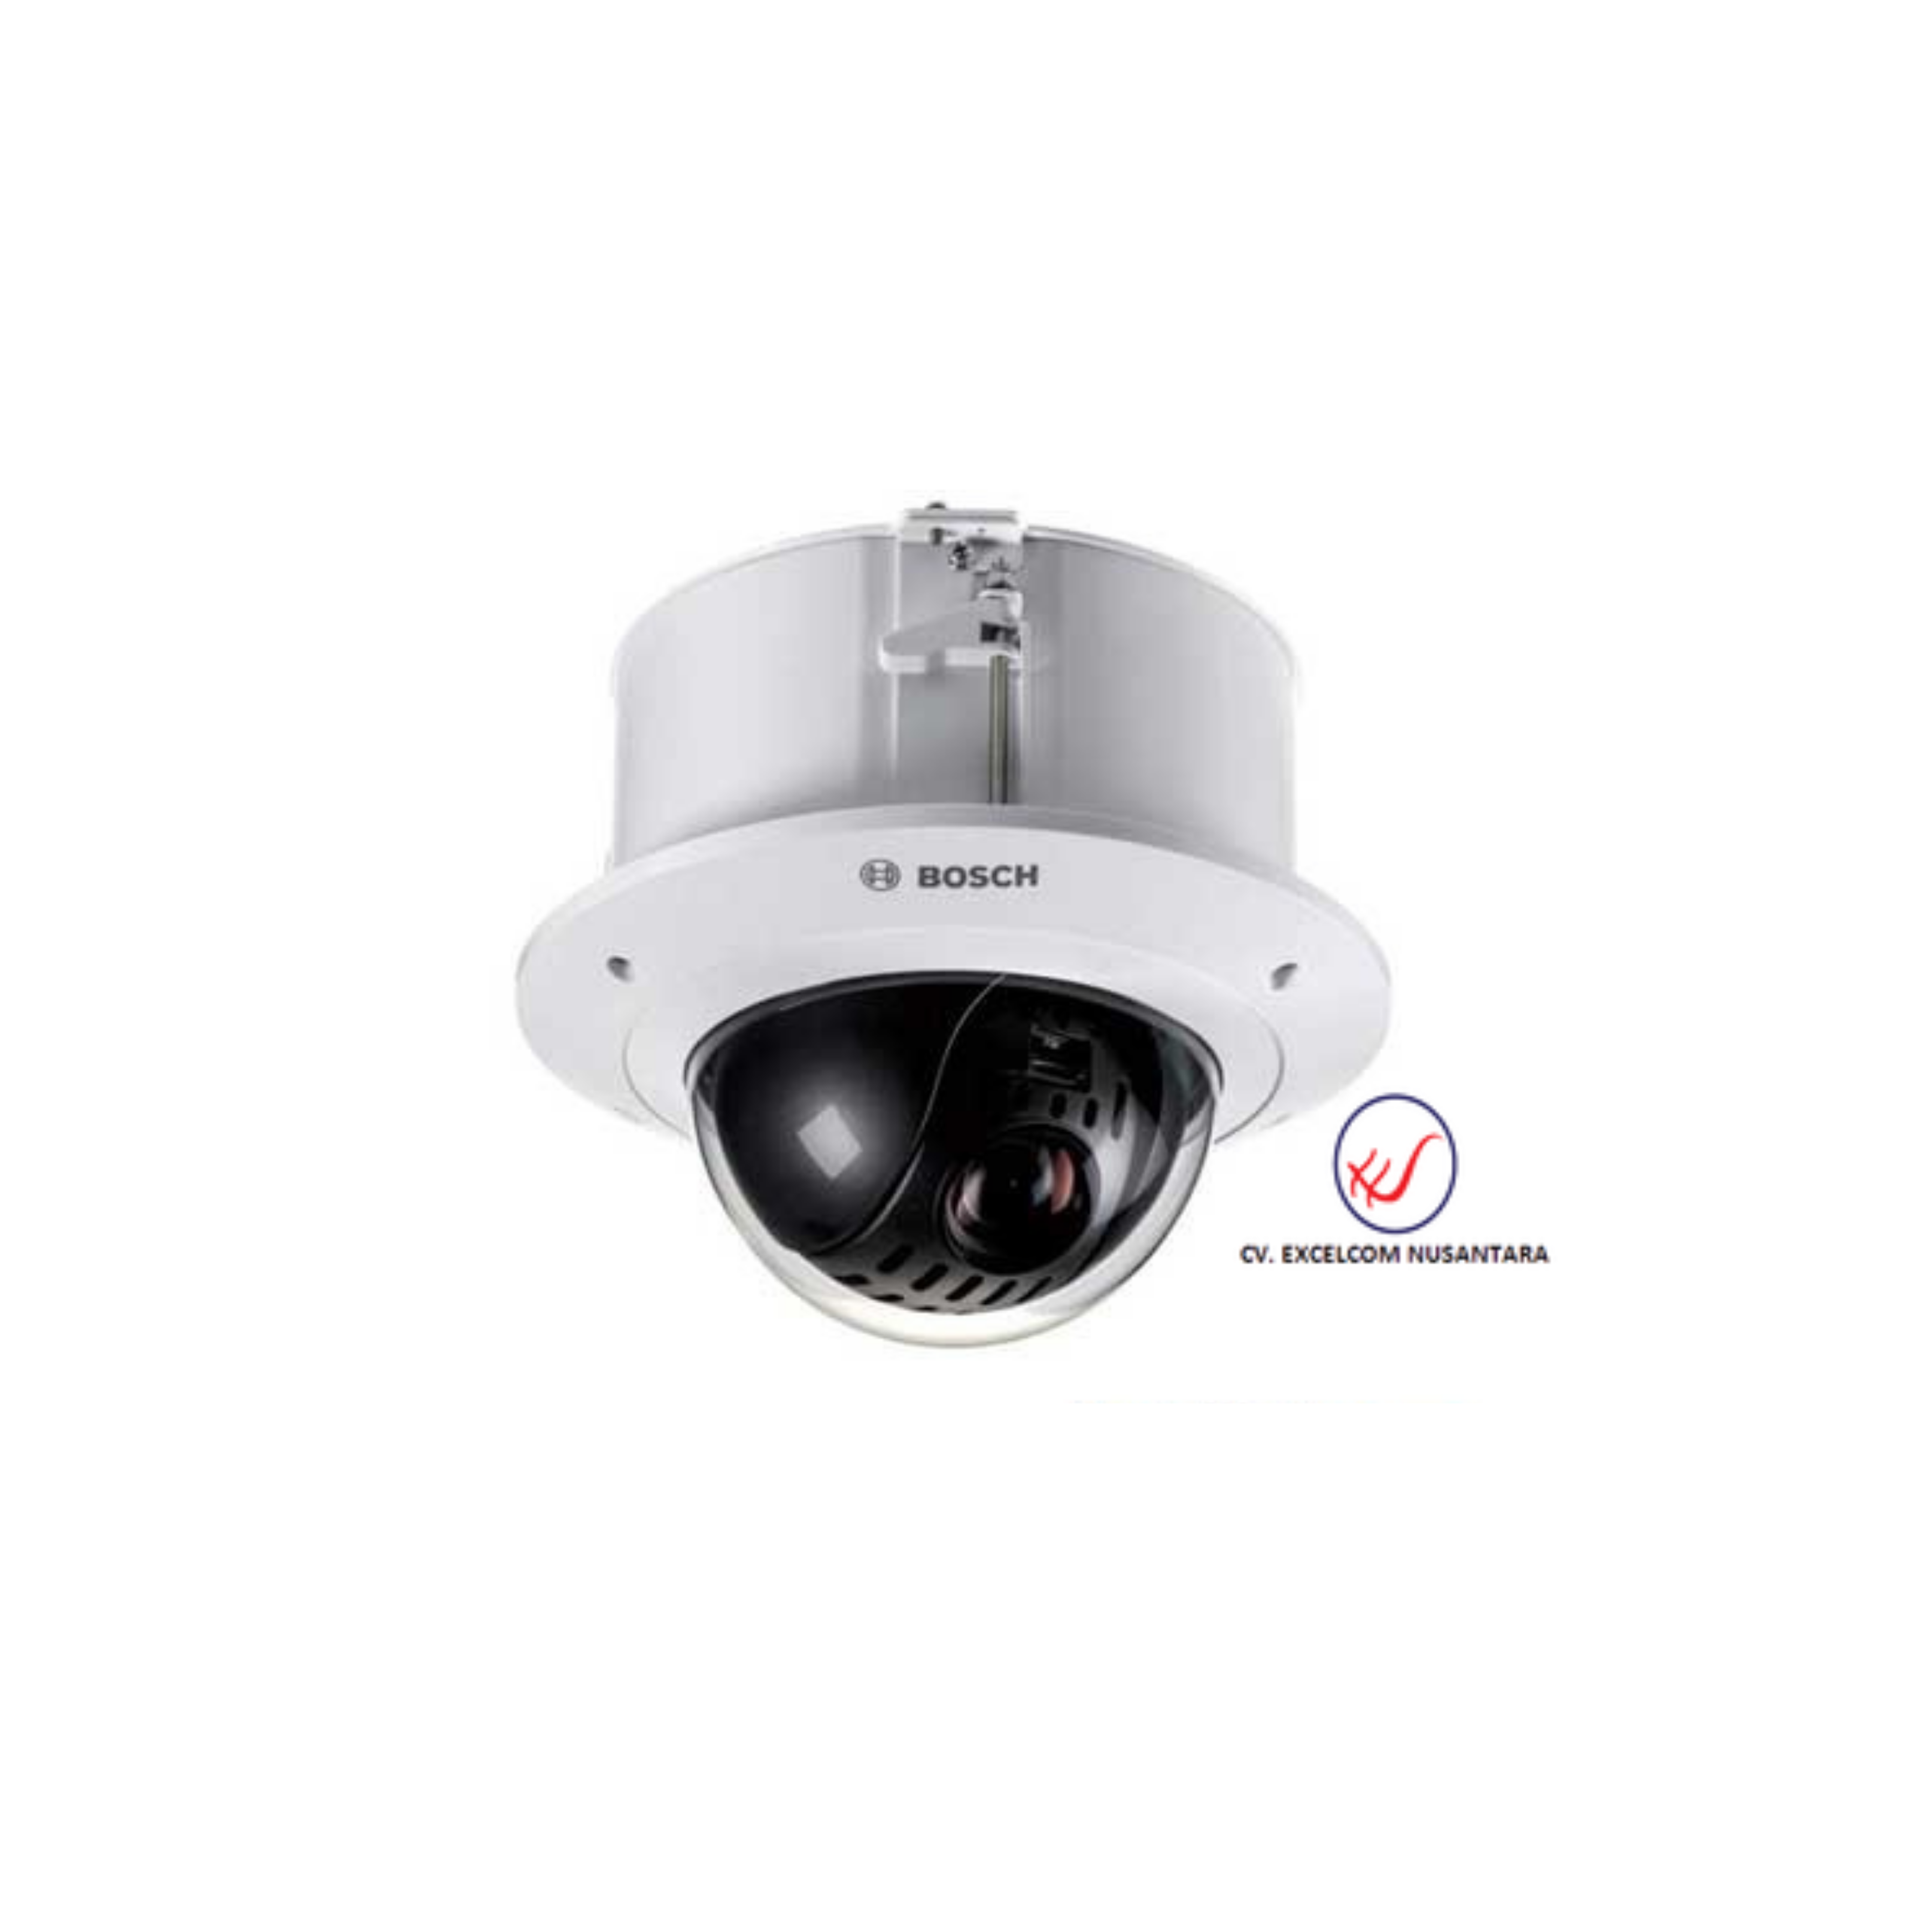 BOSCH NDP-4502-Z12C 2MP PTZ DOME IP CAMERA INDOOR IN CEILING